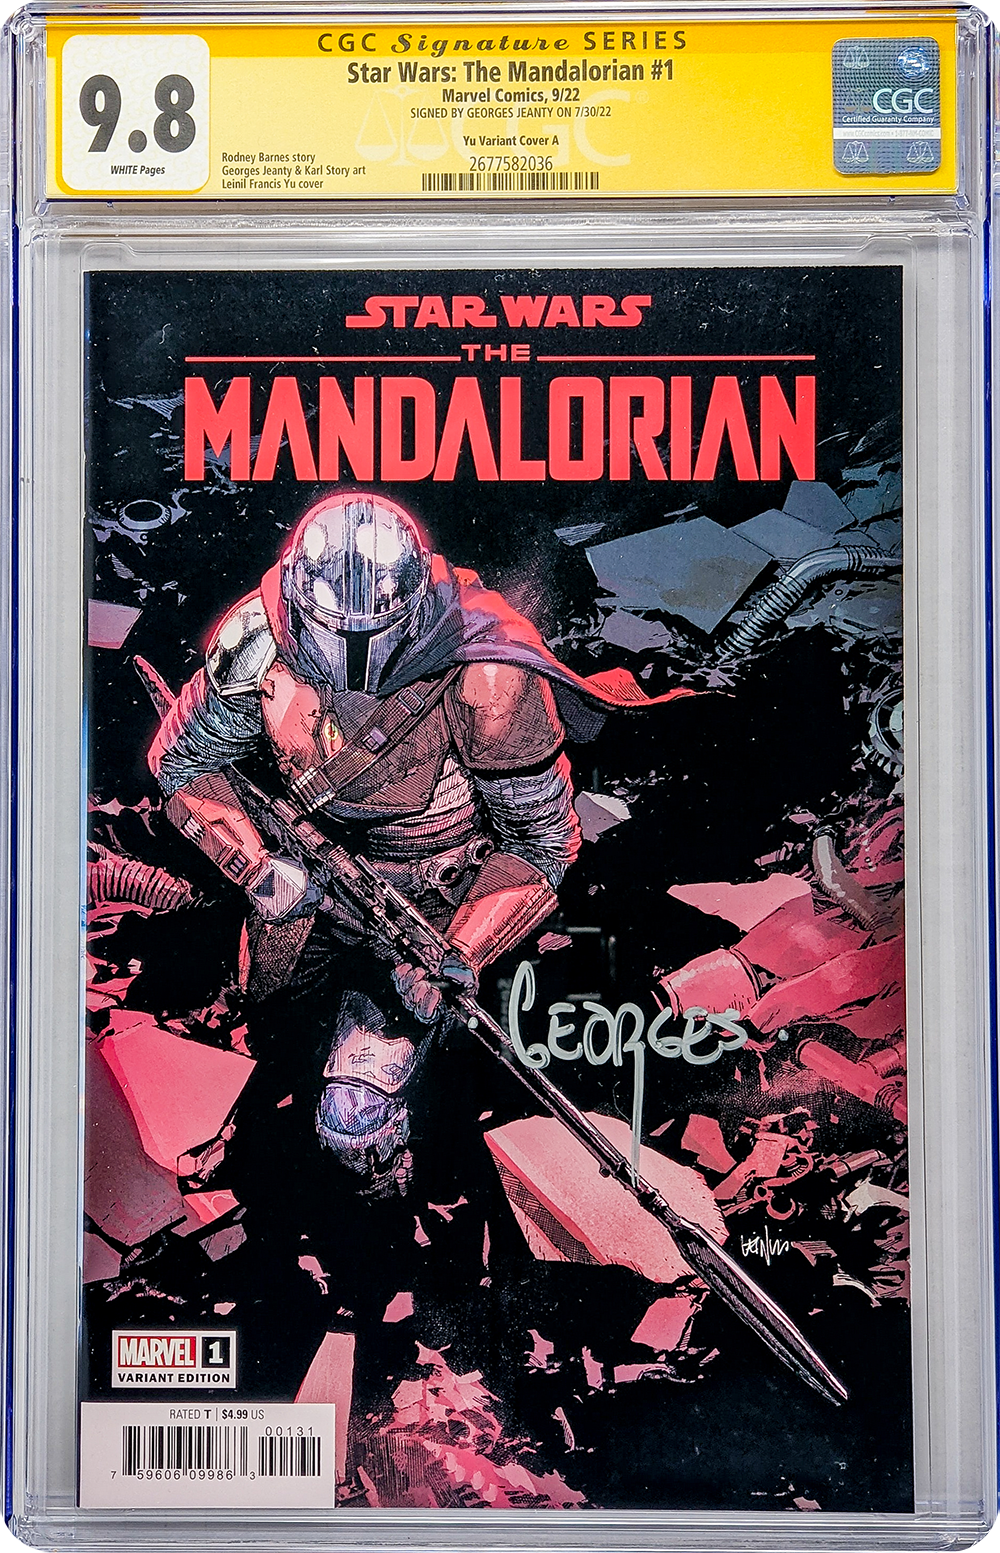 Star Wars: The Mandalorian #1 Marvel Comics Cover A CGC Signature Series 9.8 Signed Georges Jeanty GalaxyCon